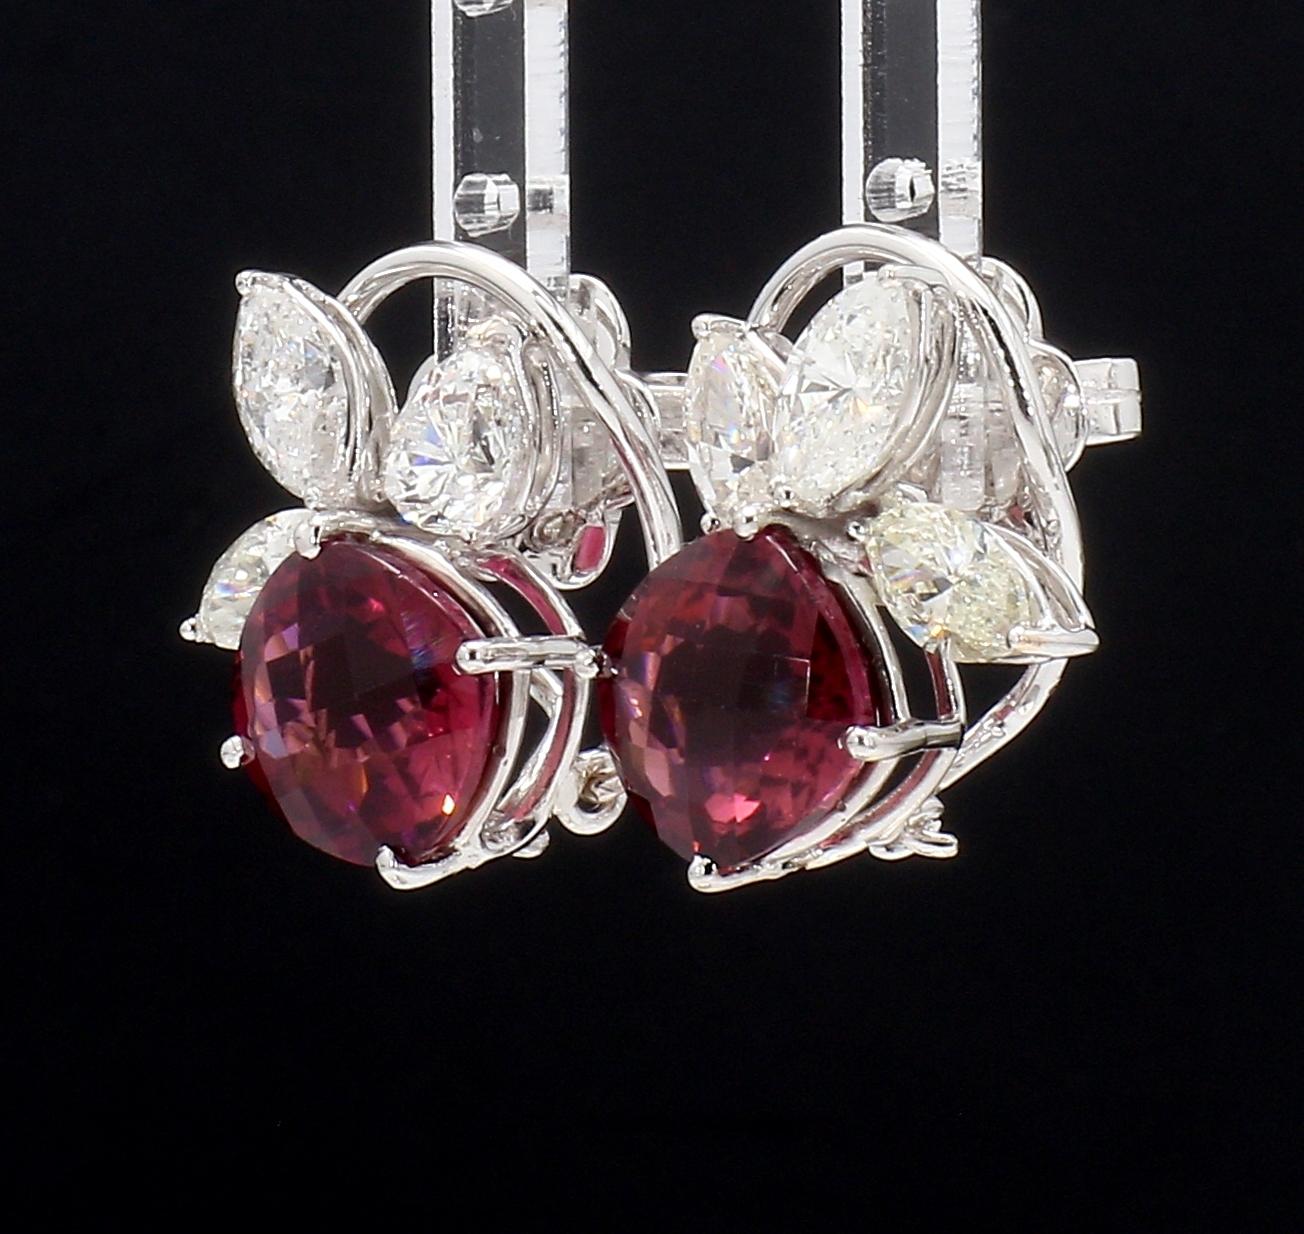 Anglo-Indian 3Ct Marquise Diamonds with Pink Tourmaline Earrings in White Gold Hallmarked